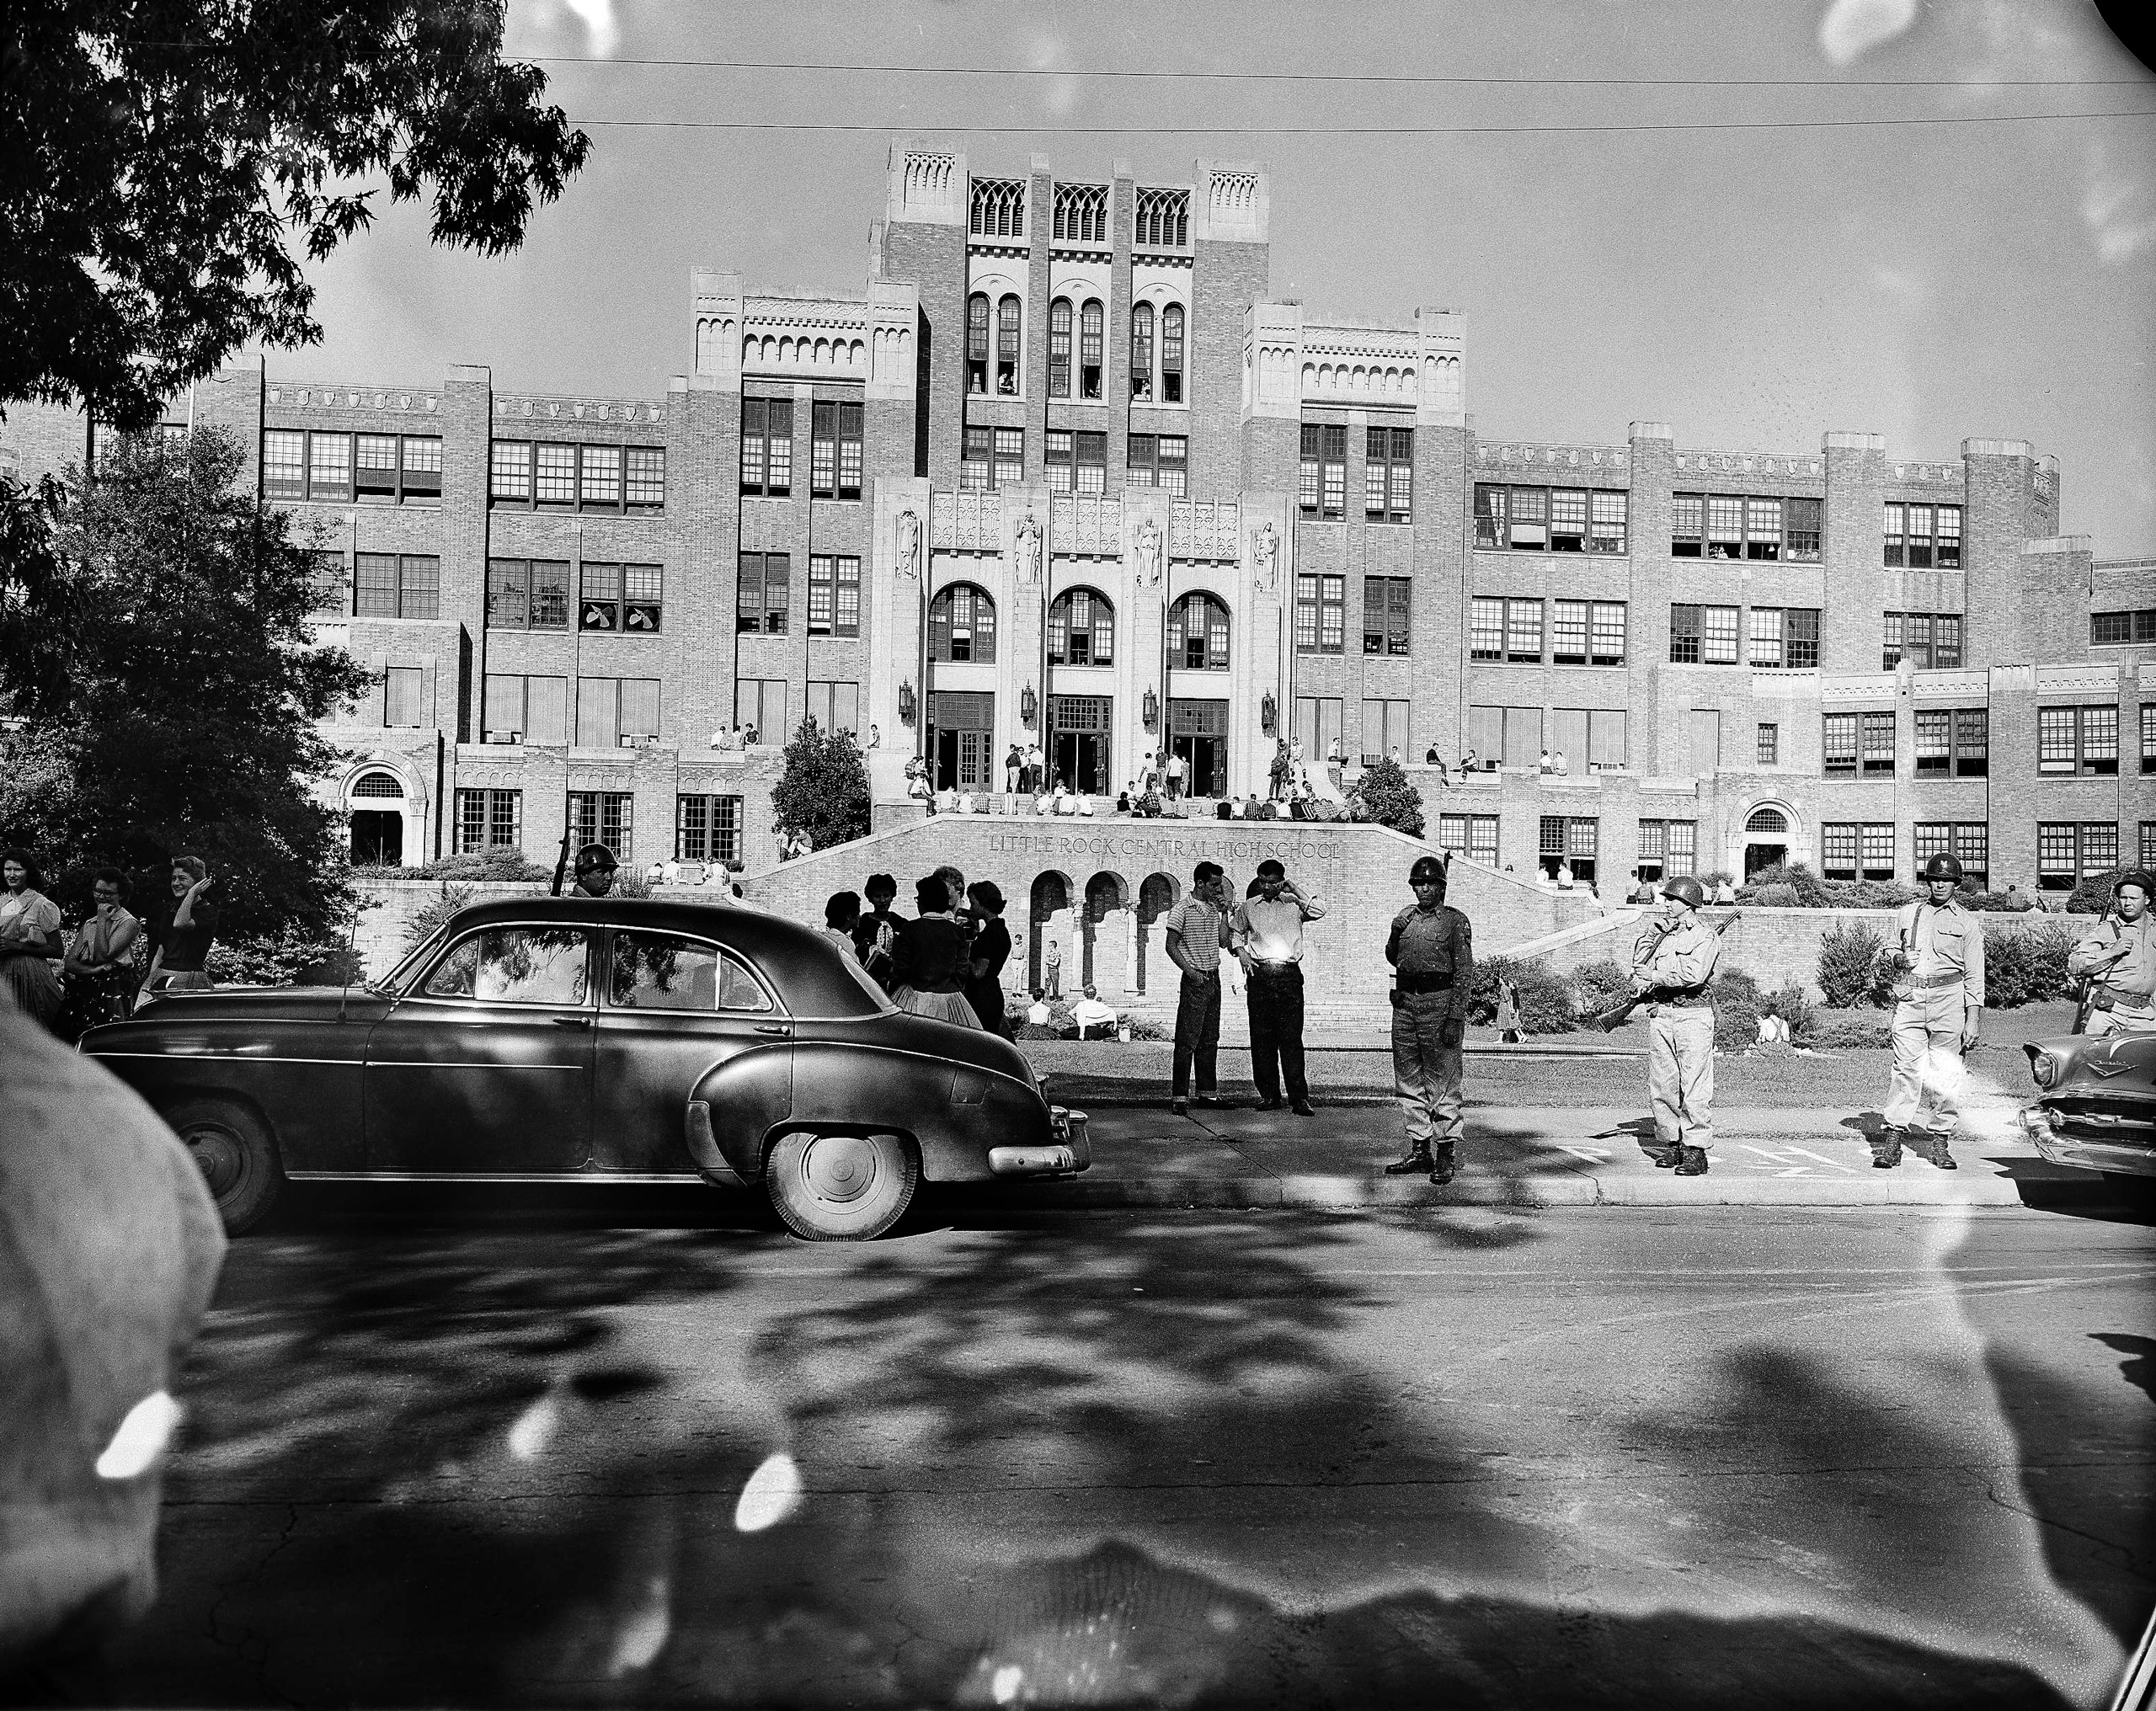 A small crowd of people gathering in front of Little Rock Central High School on Sept. 16, 1957. (Henry Griffin—AP)